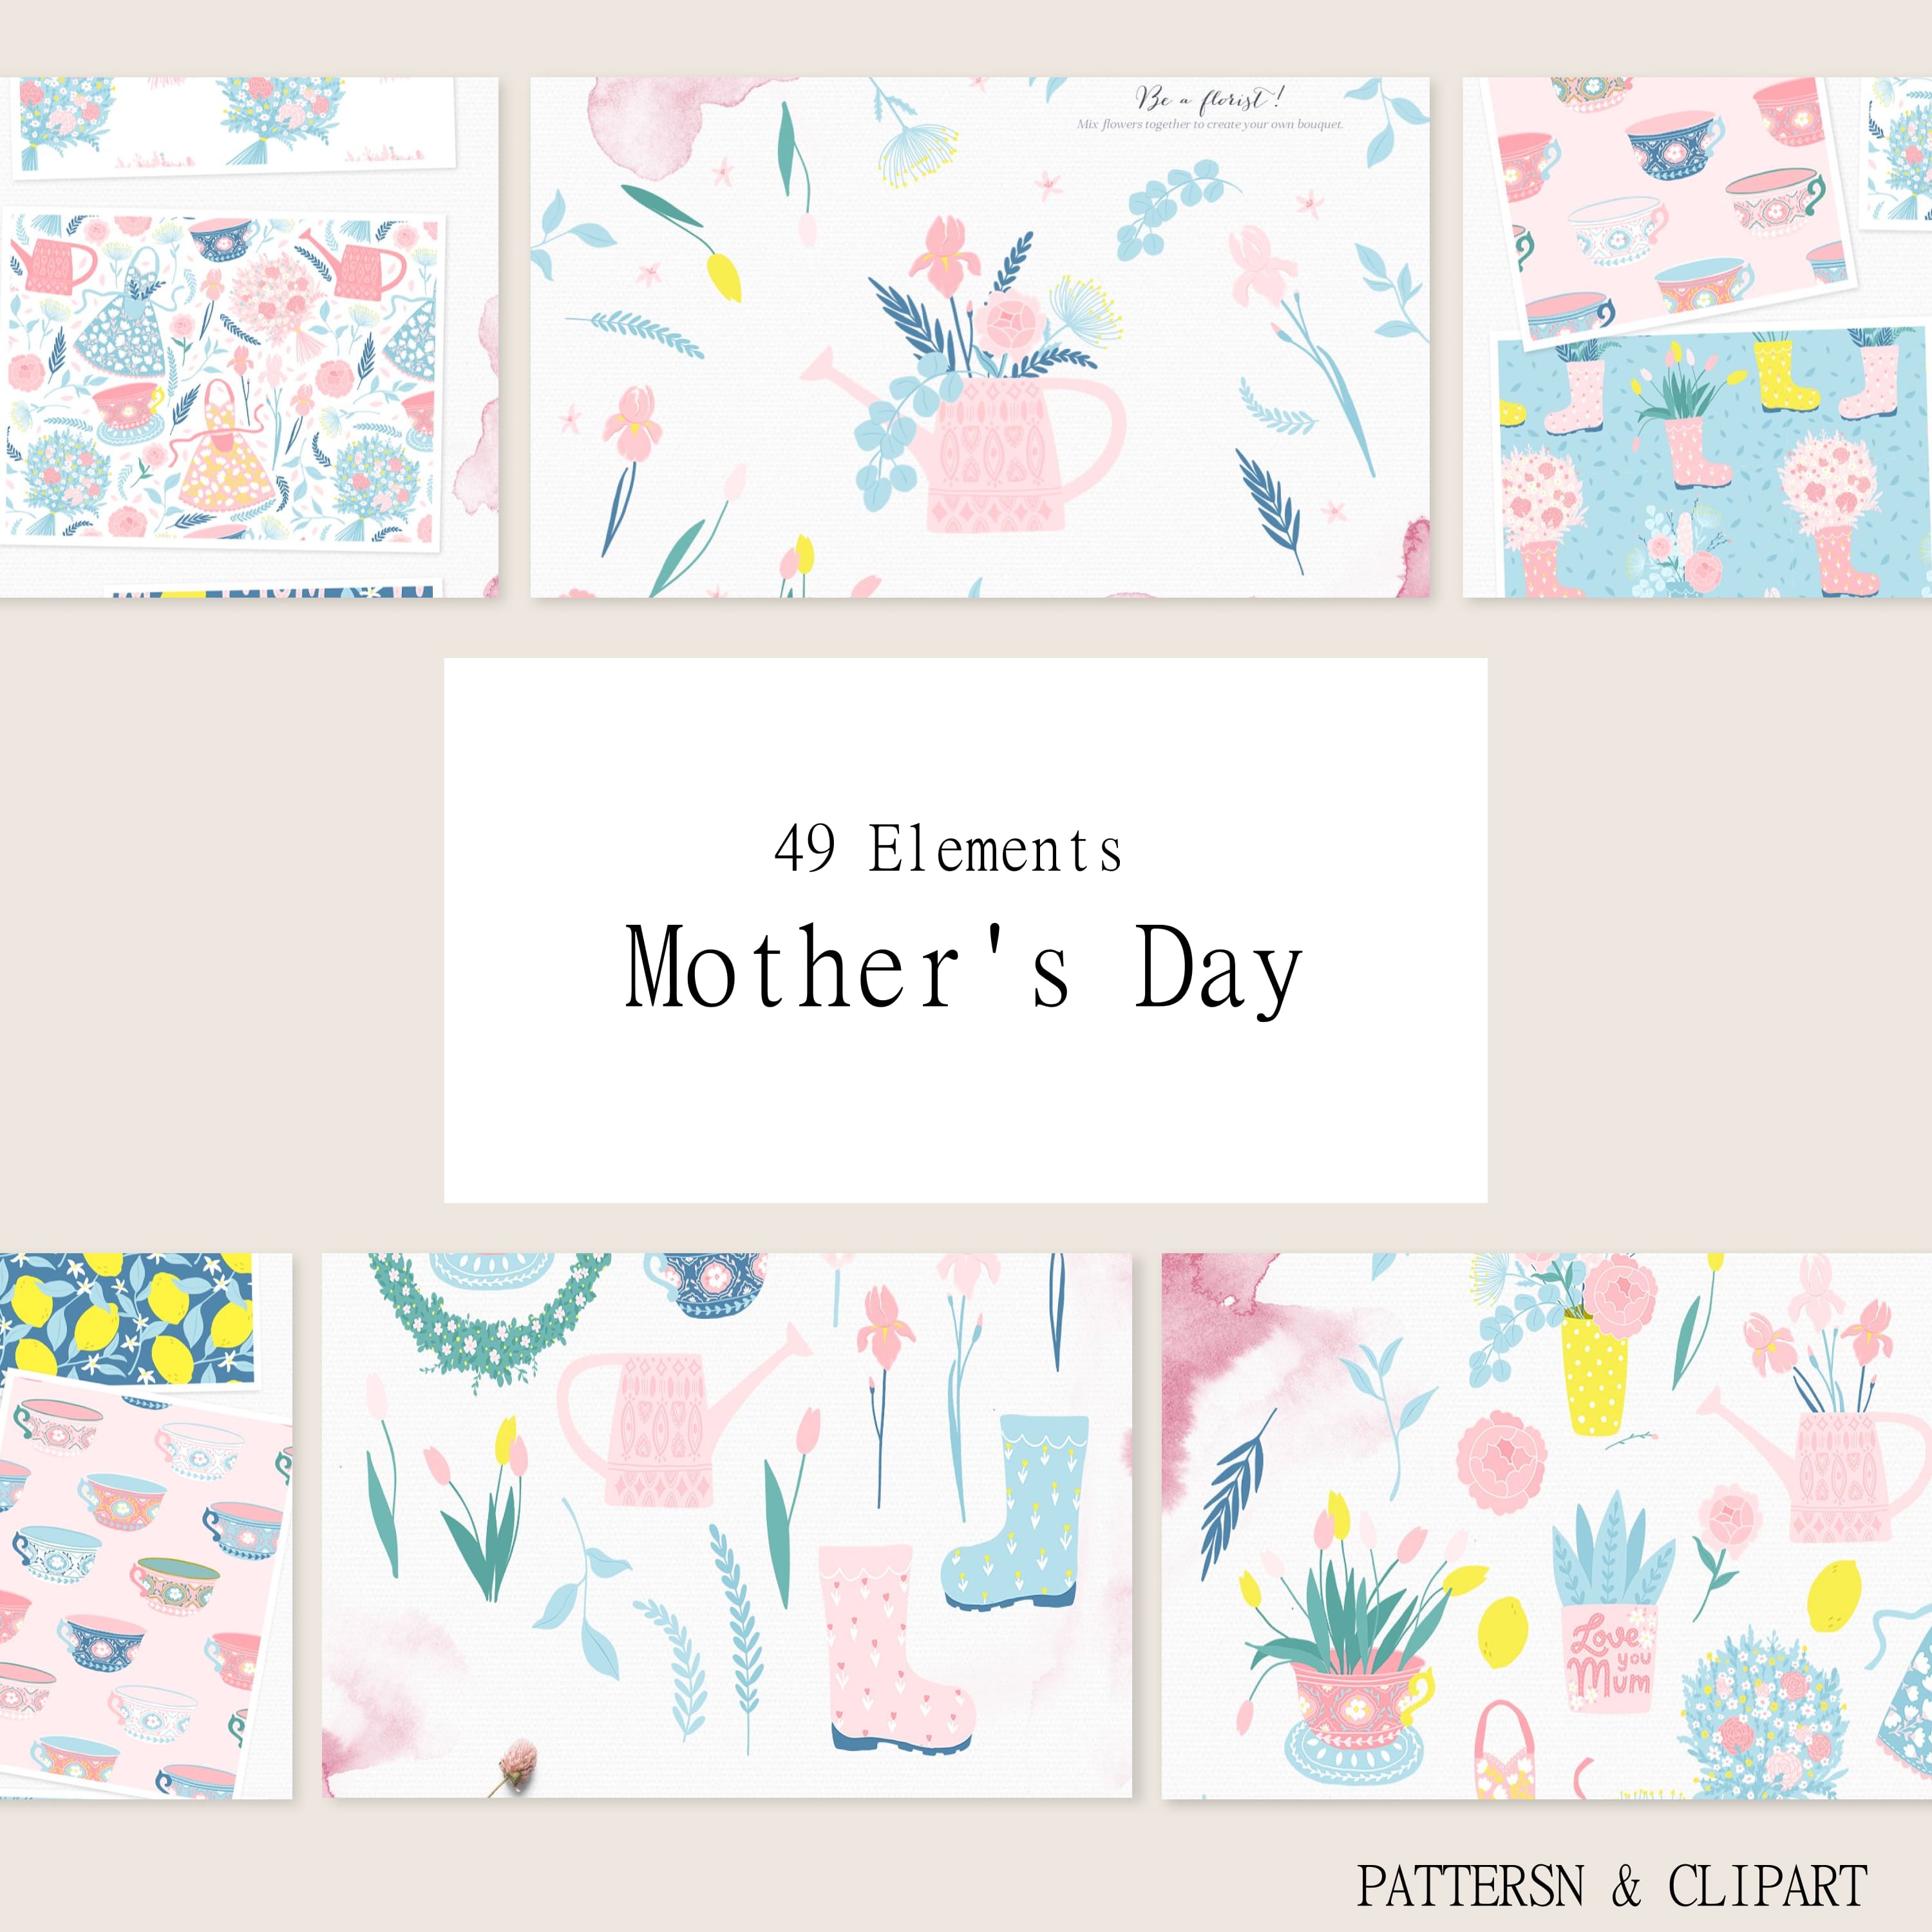 Mother's Day prints and patterns cover.